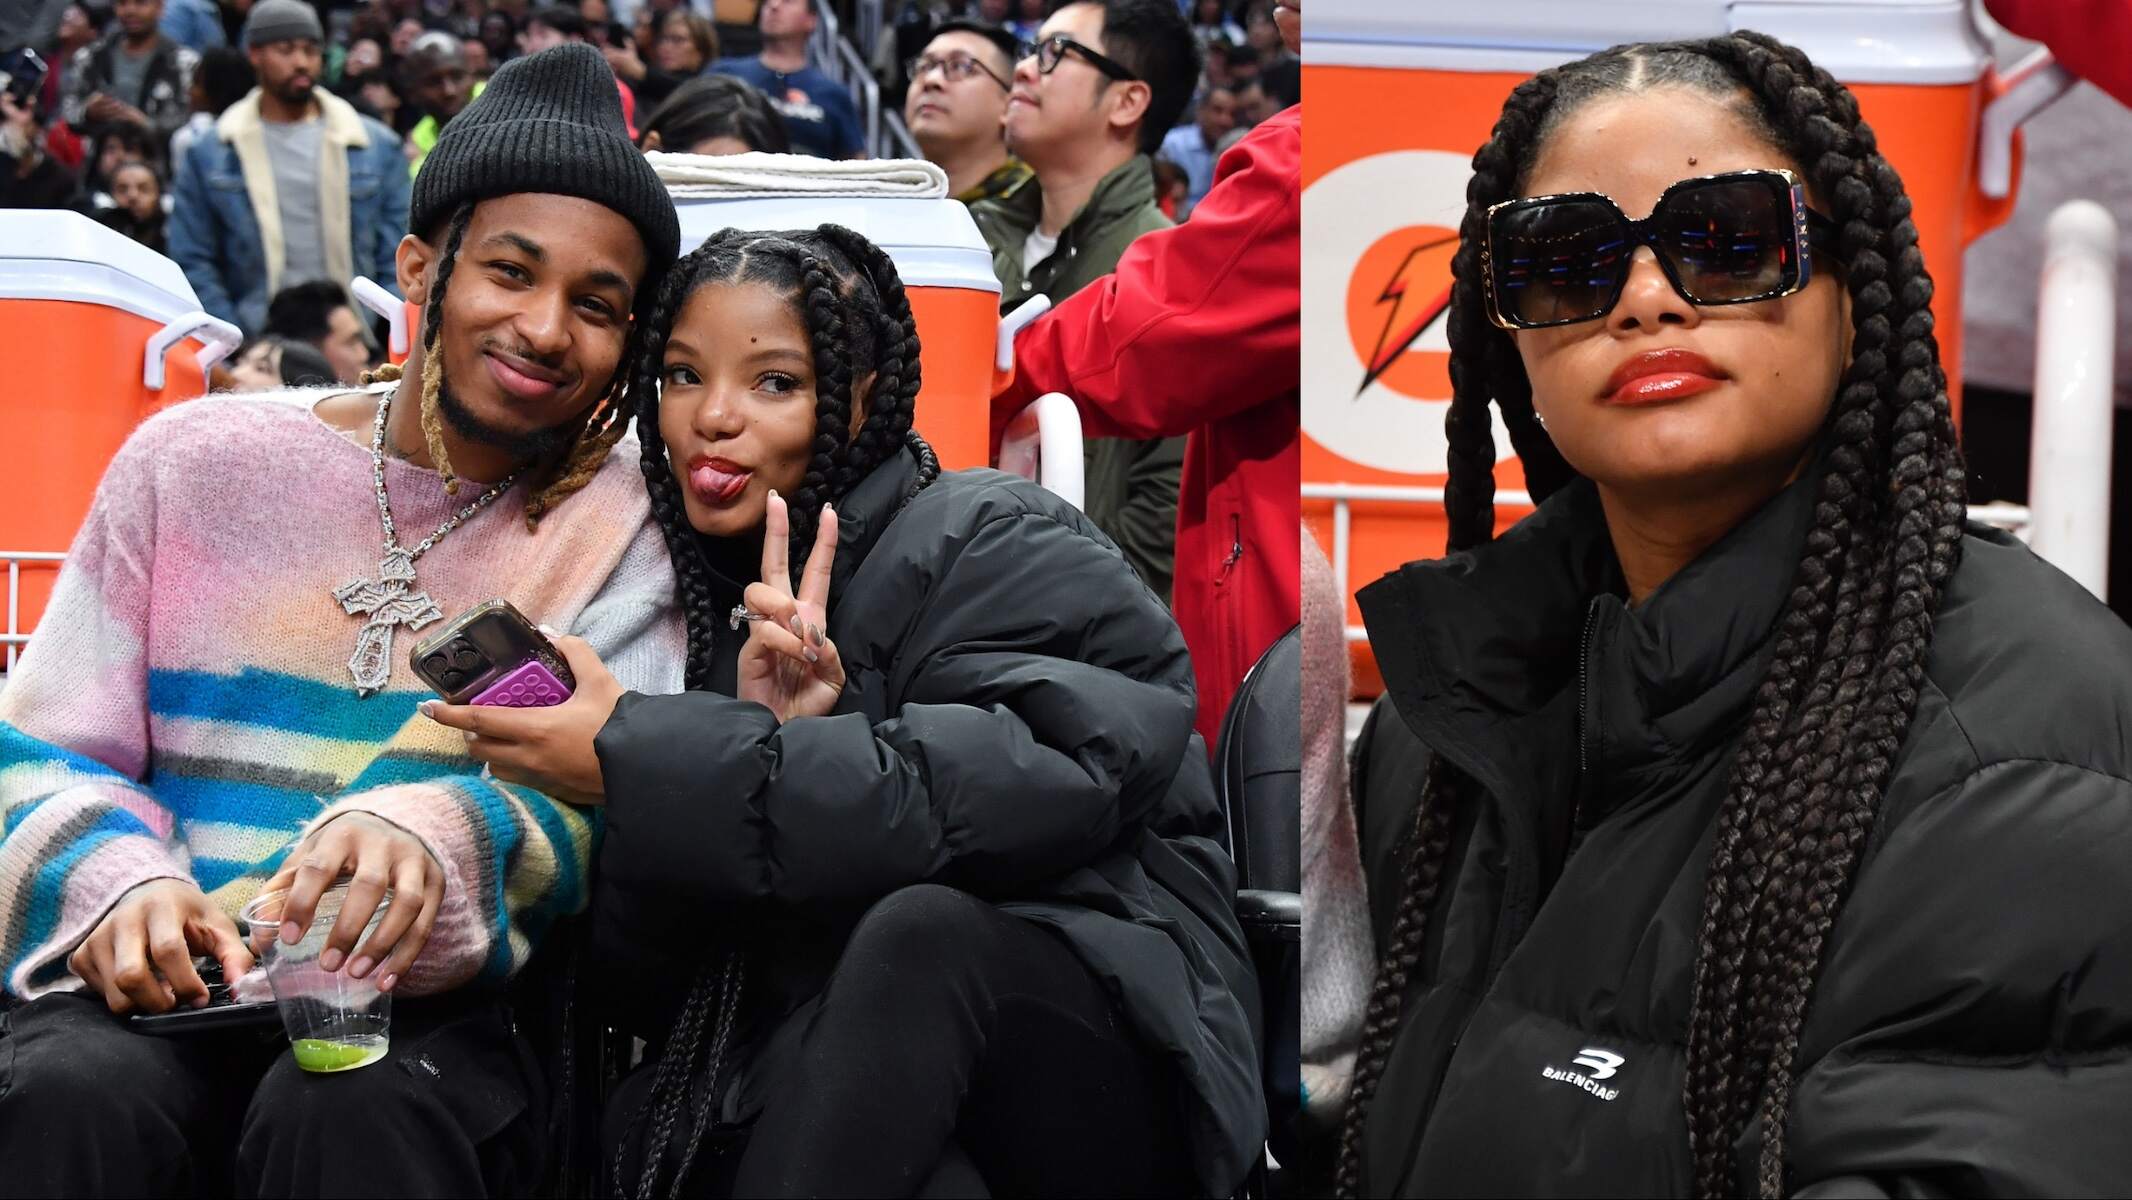 Darryl Dwayne “DDG” Grandberry Jr. and Halle Bailey smile for the camera while sitting front row at a Clippers game